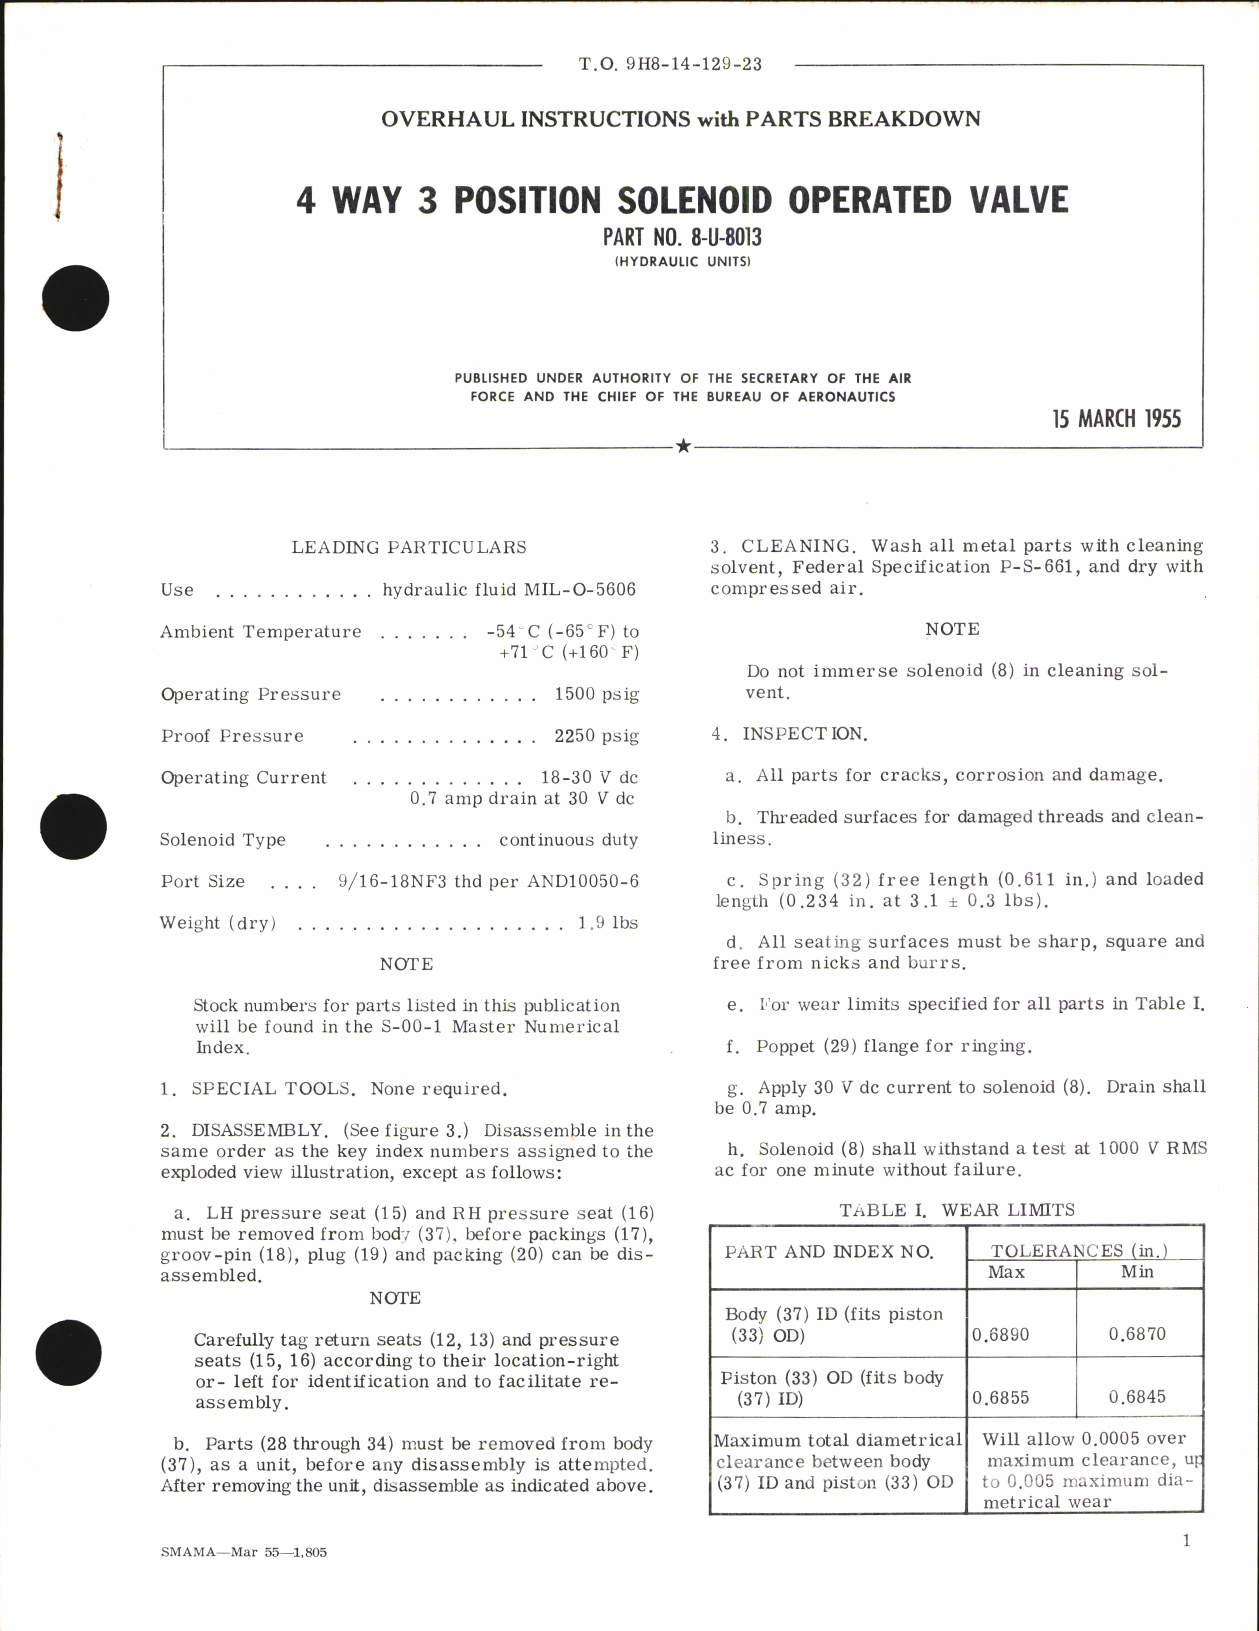 Sample page 1 from AirCorps Library document: Overhaul Instructions with Parts Breakdown for 4 Way 3 Position Solenoid Operated Valve Part No. 8-U-8013